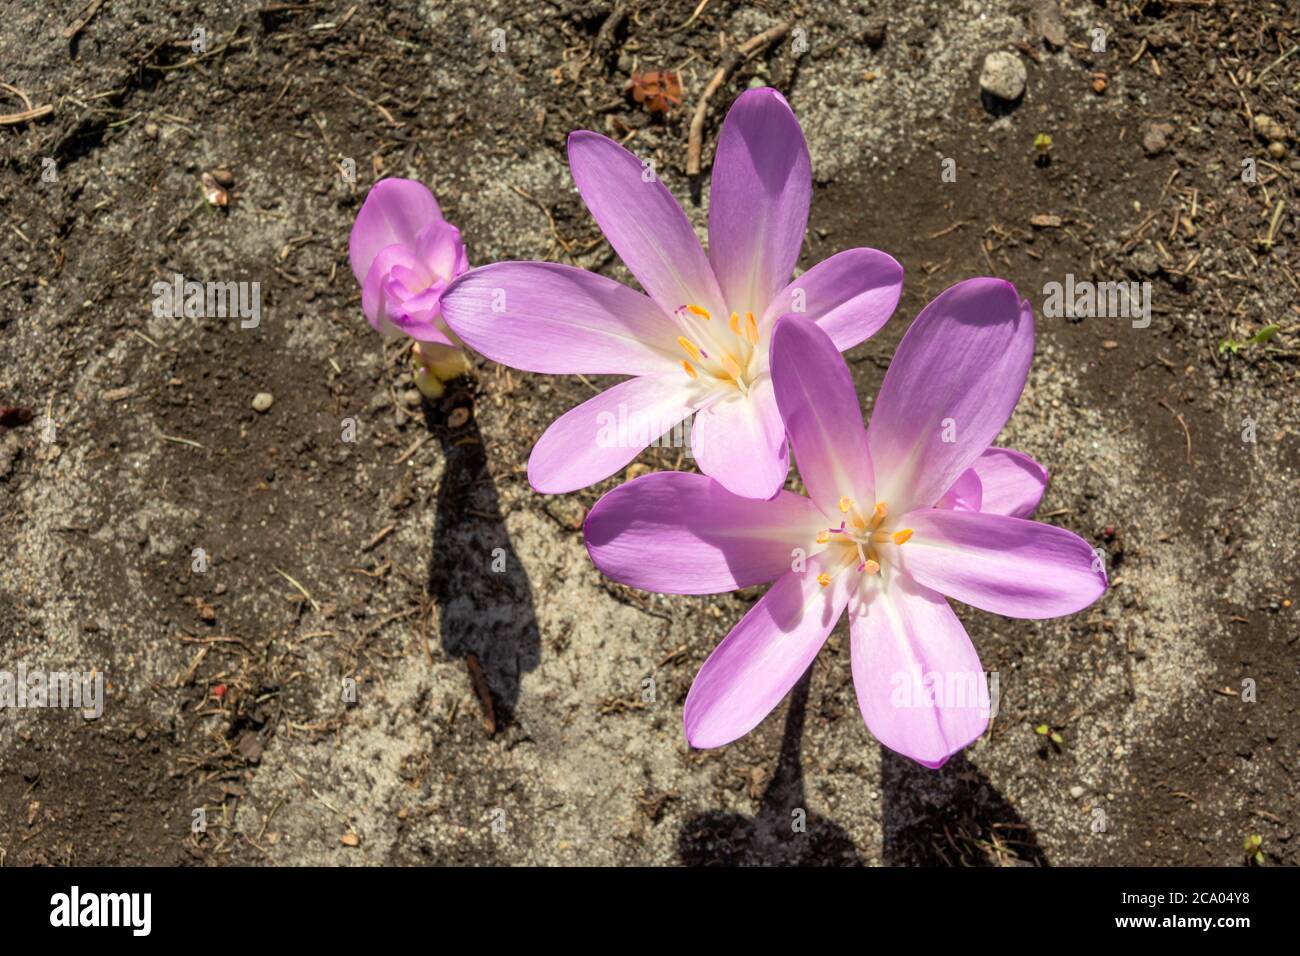 Wide open purple crocus flowers, view from above on a sunny day Stock Photo